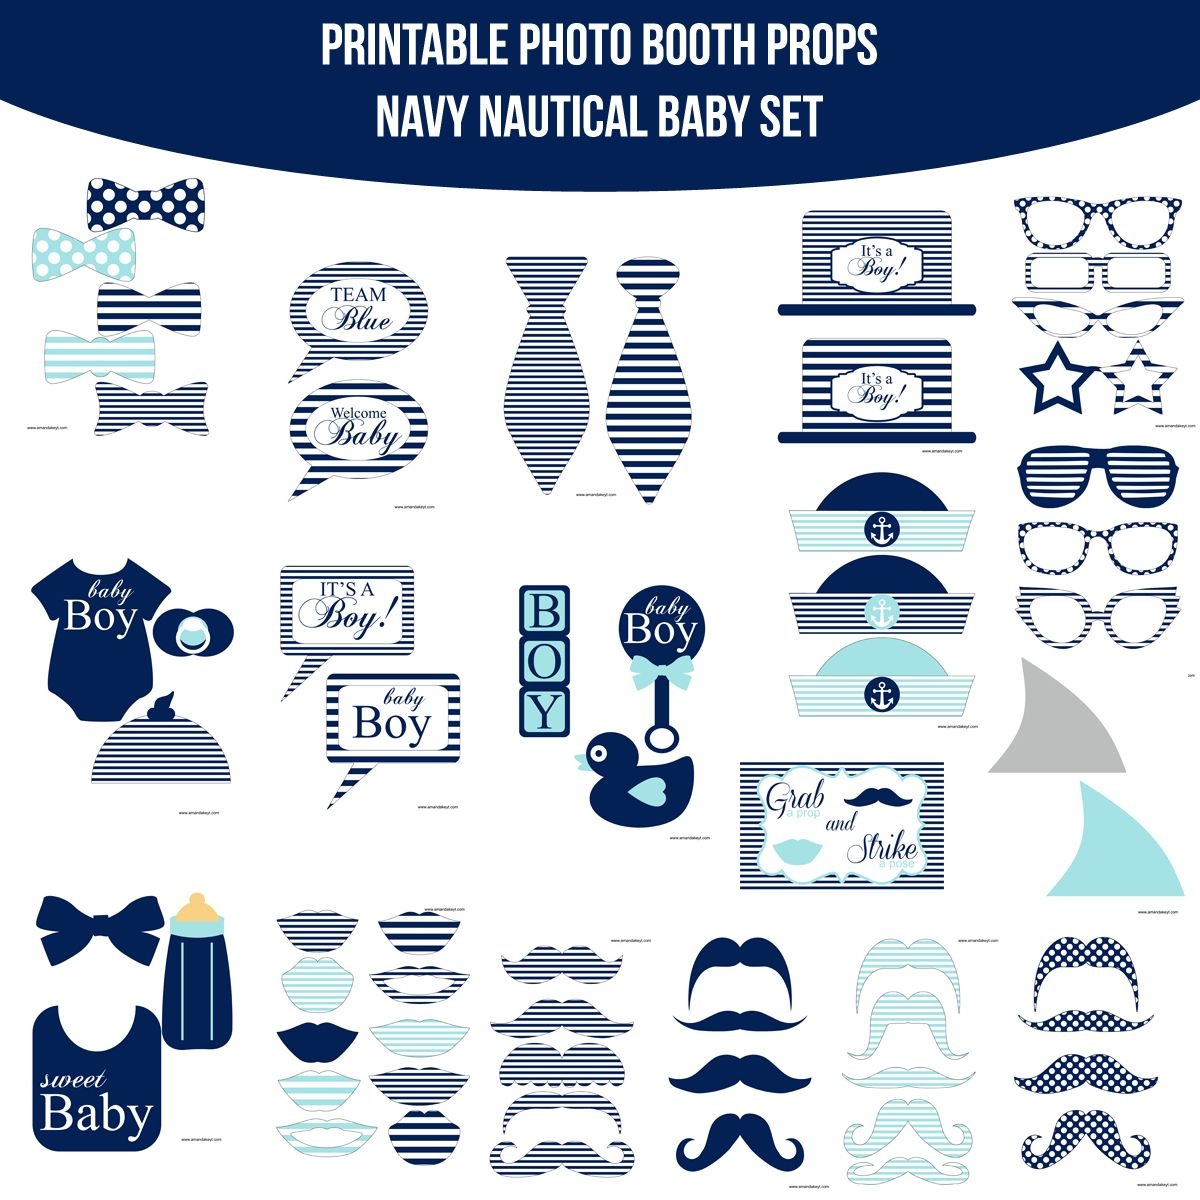 Instant Download Baby Nautical Navy Printable Photo Booth Prop Set - Free Printable Boy Baby Shower Photo Booth Props